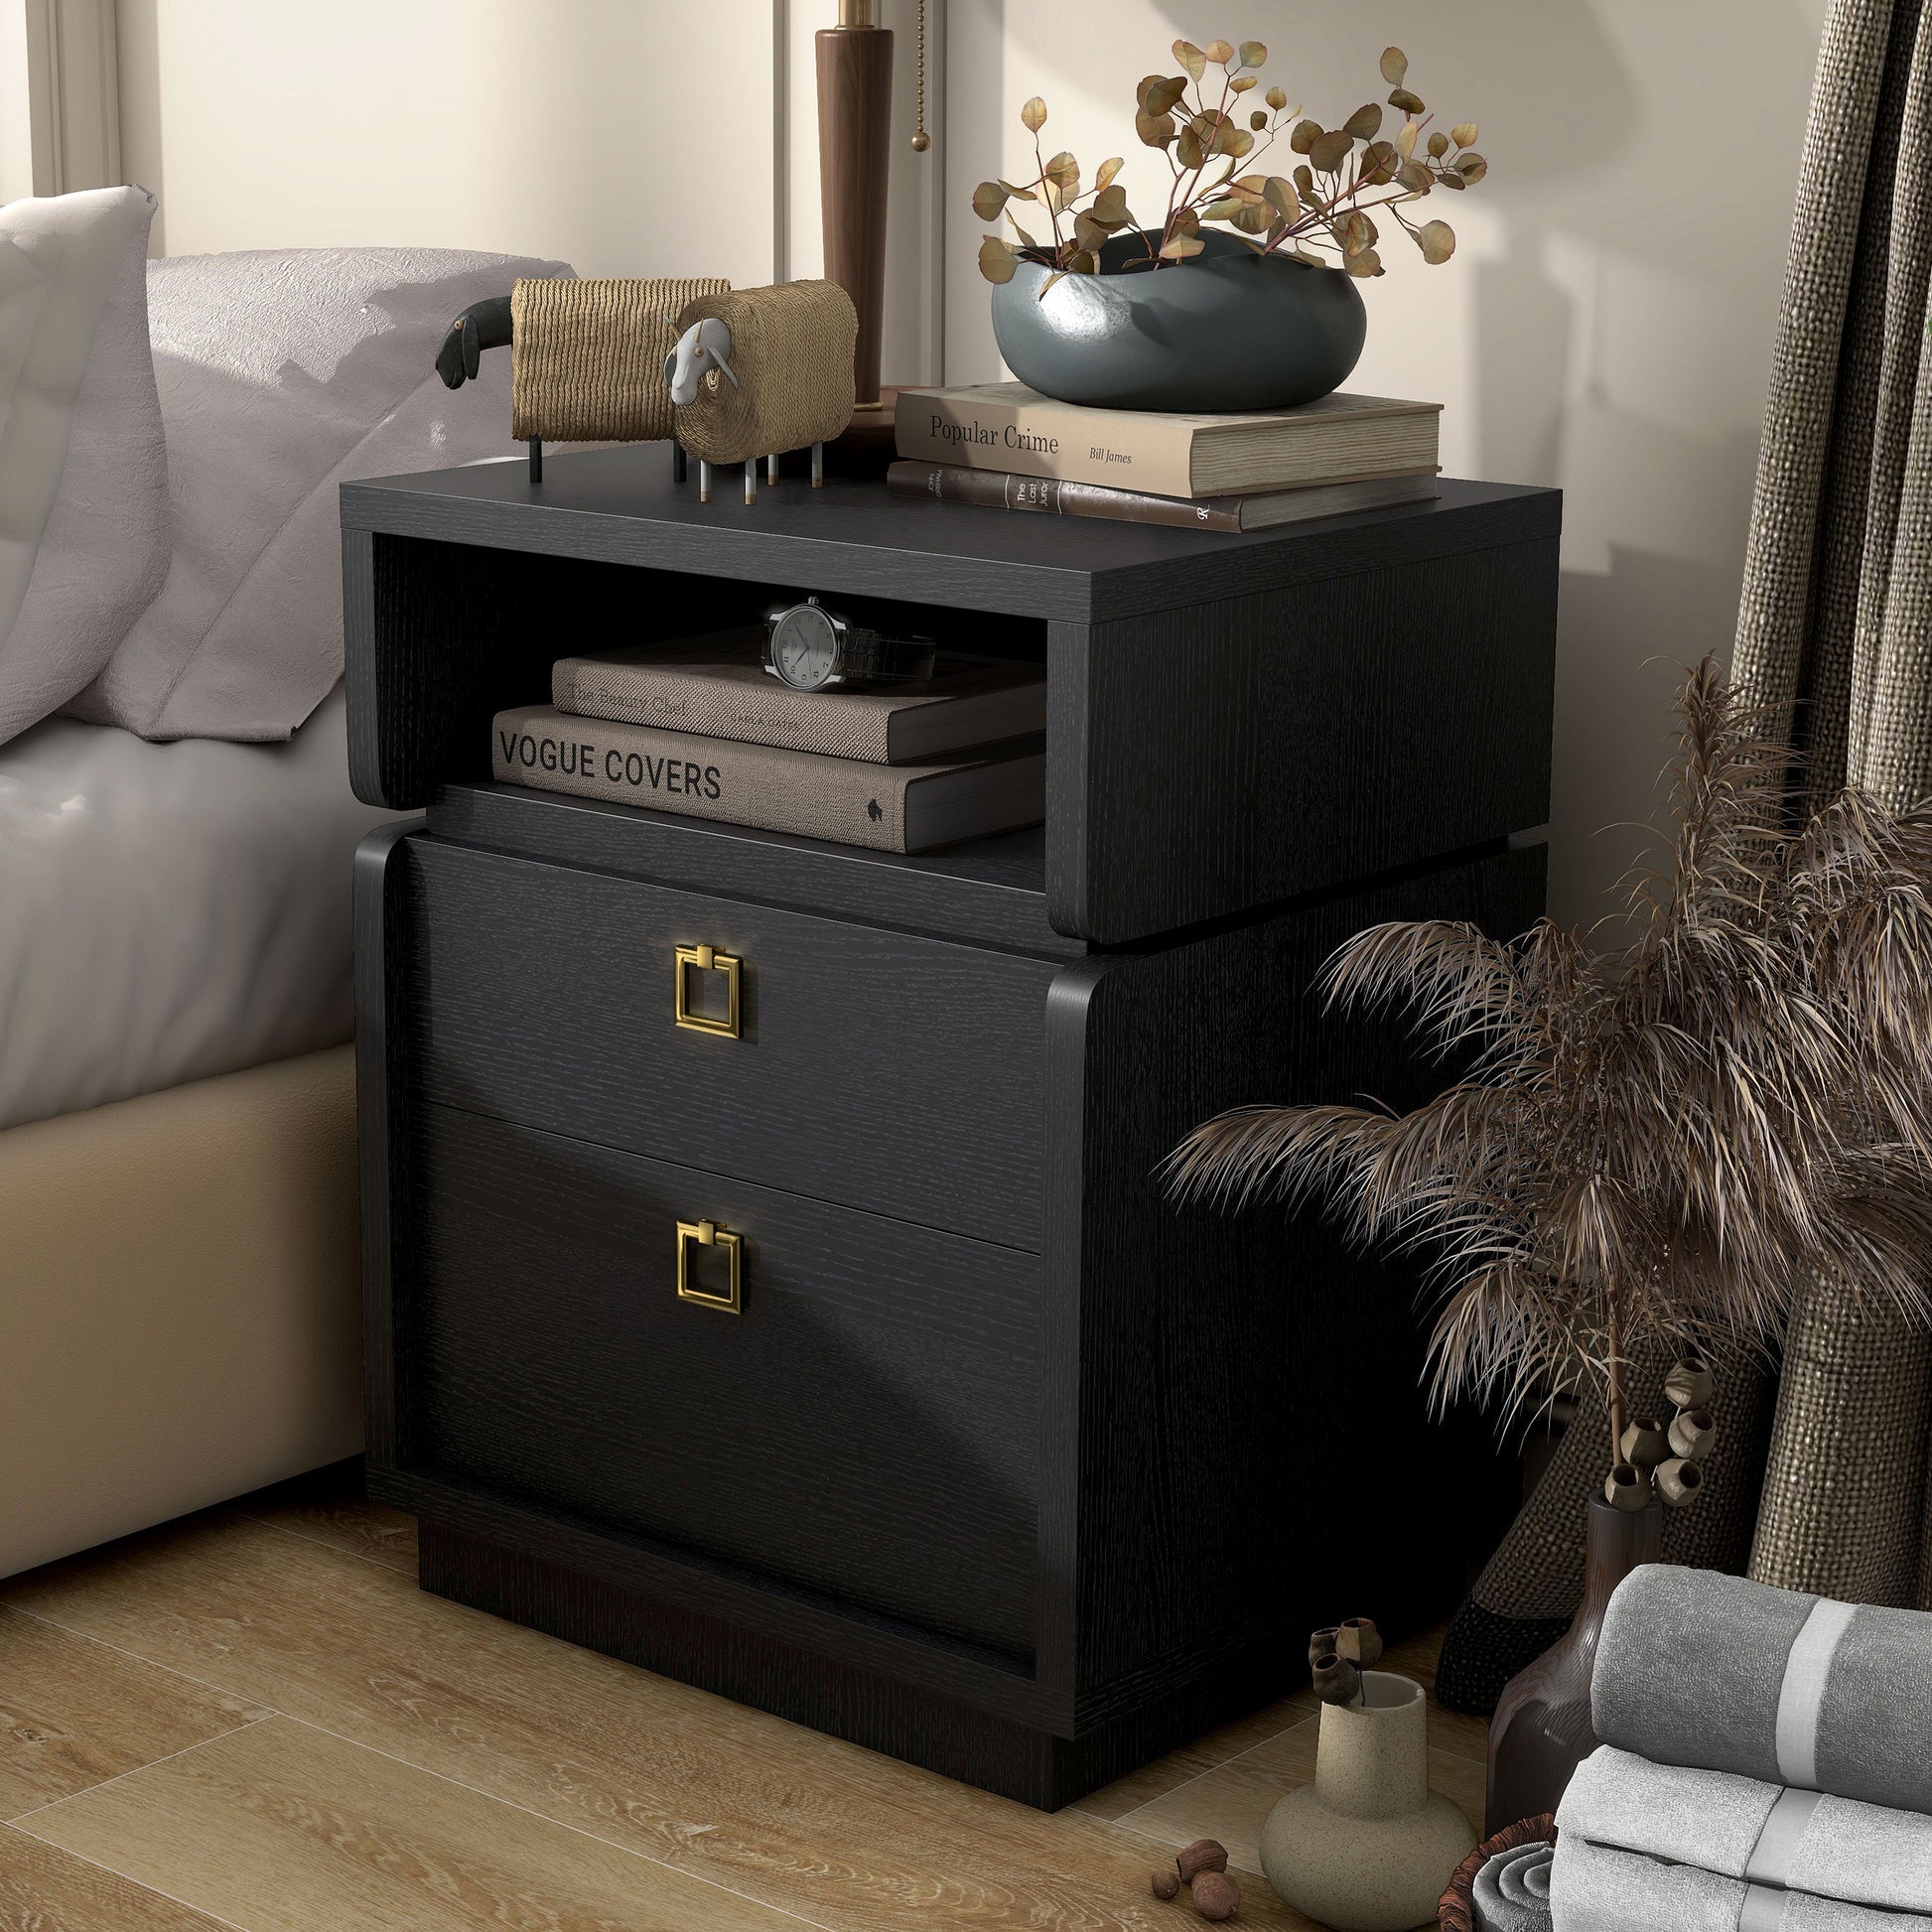 Left angled modern black two-drawer nightstand/end table in a bedroom with accessories